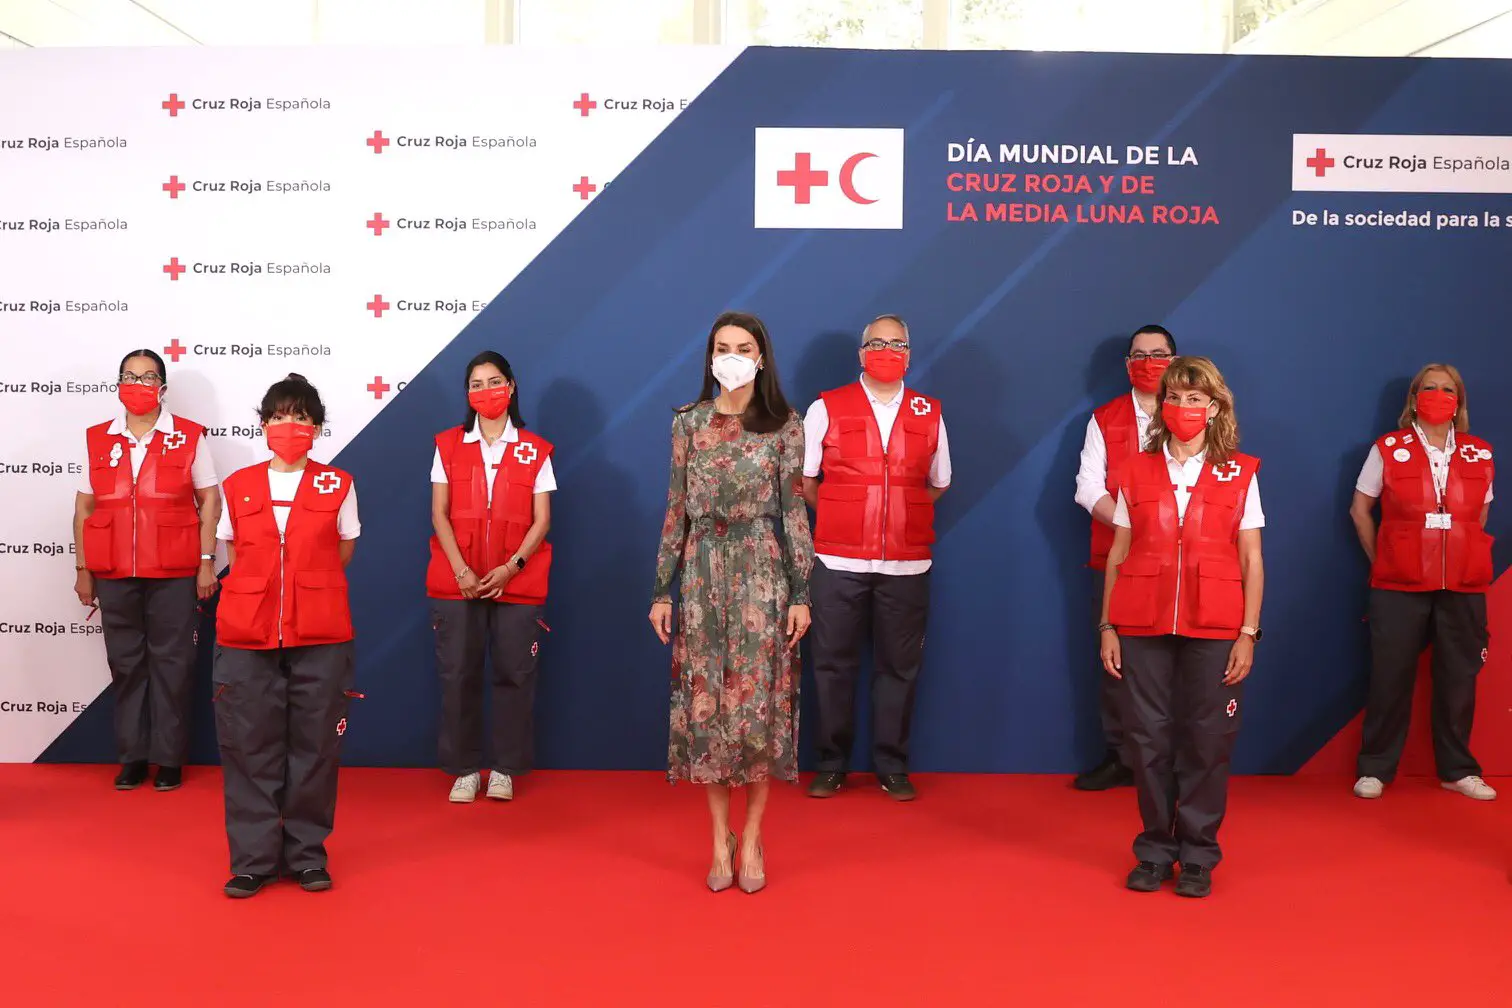 Queen Letizia of Spain marked the Red cross day